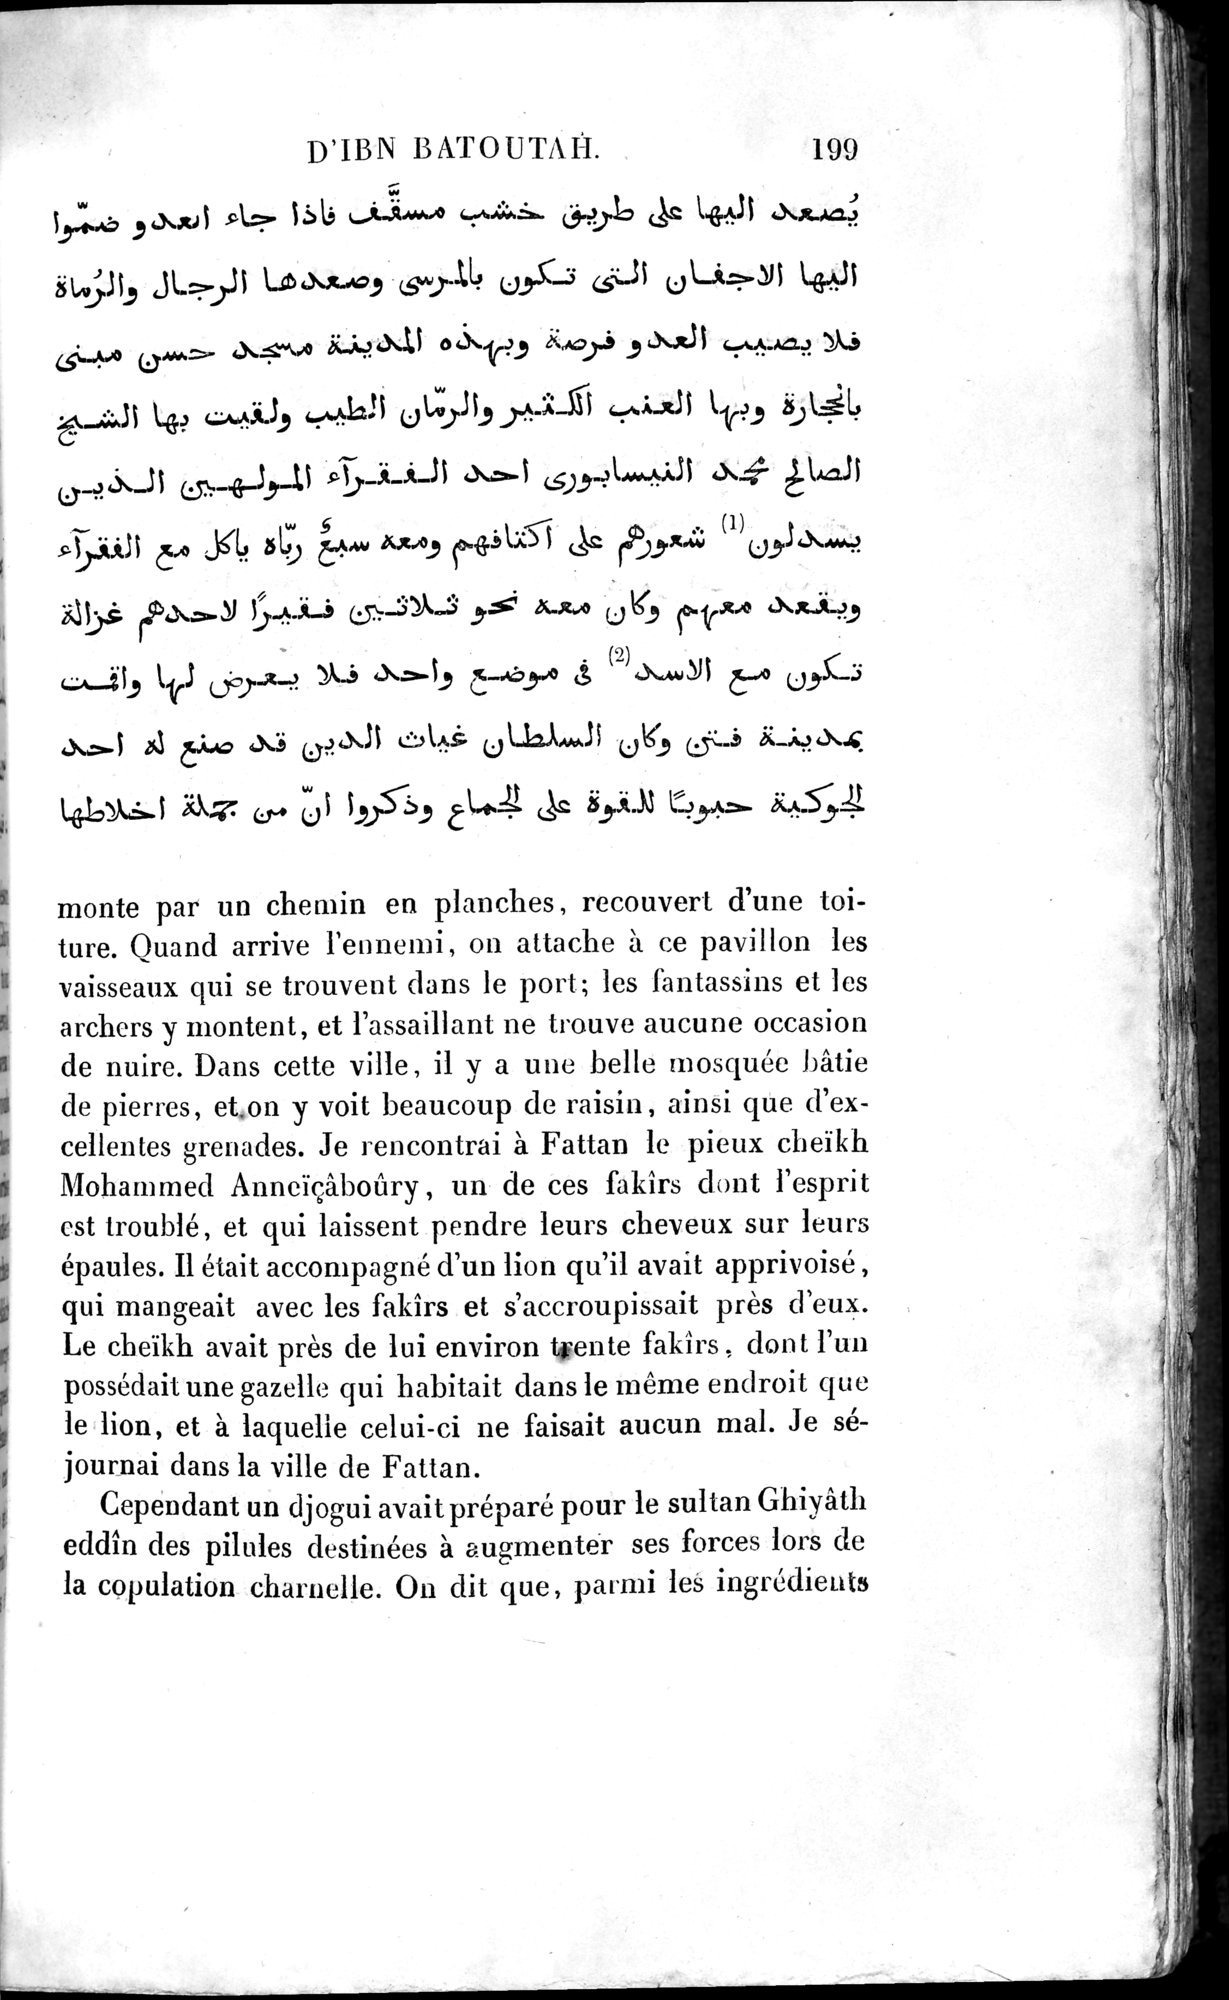 Voyages d'Ibn Batoutah : vol.4 / Page 211 (Grayscale High Resolution Image)